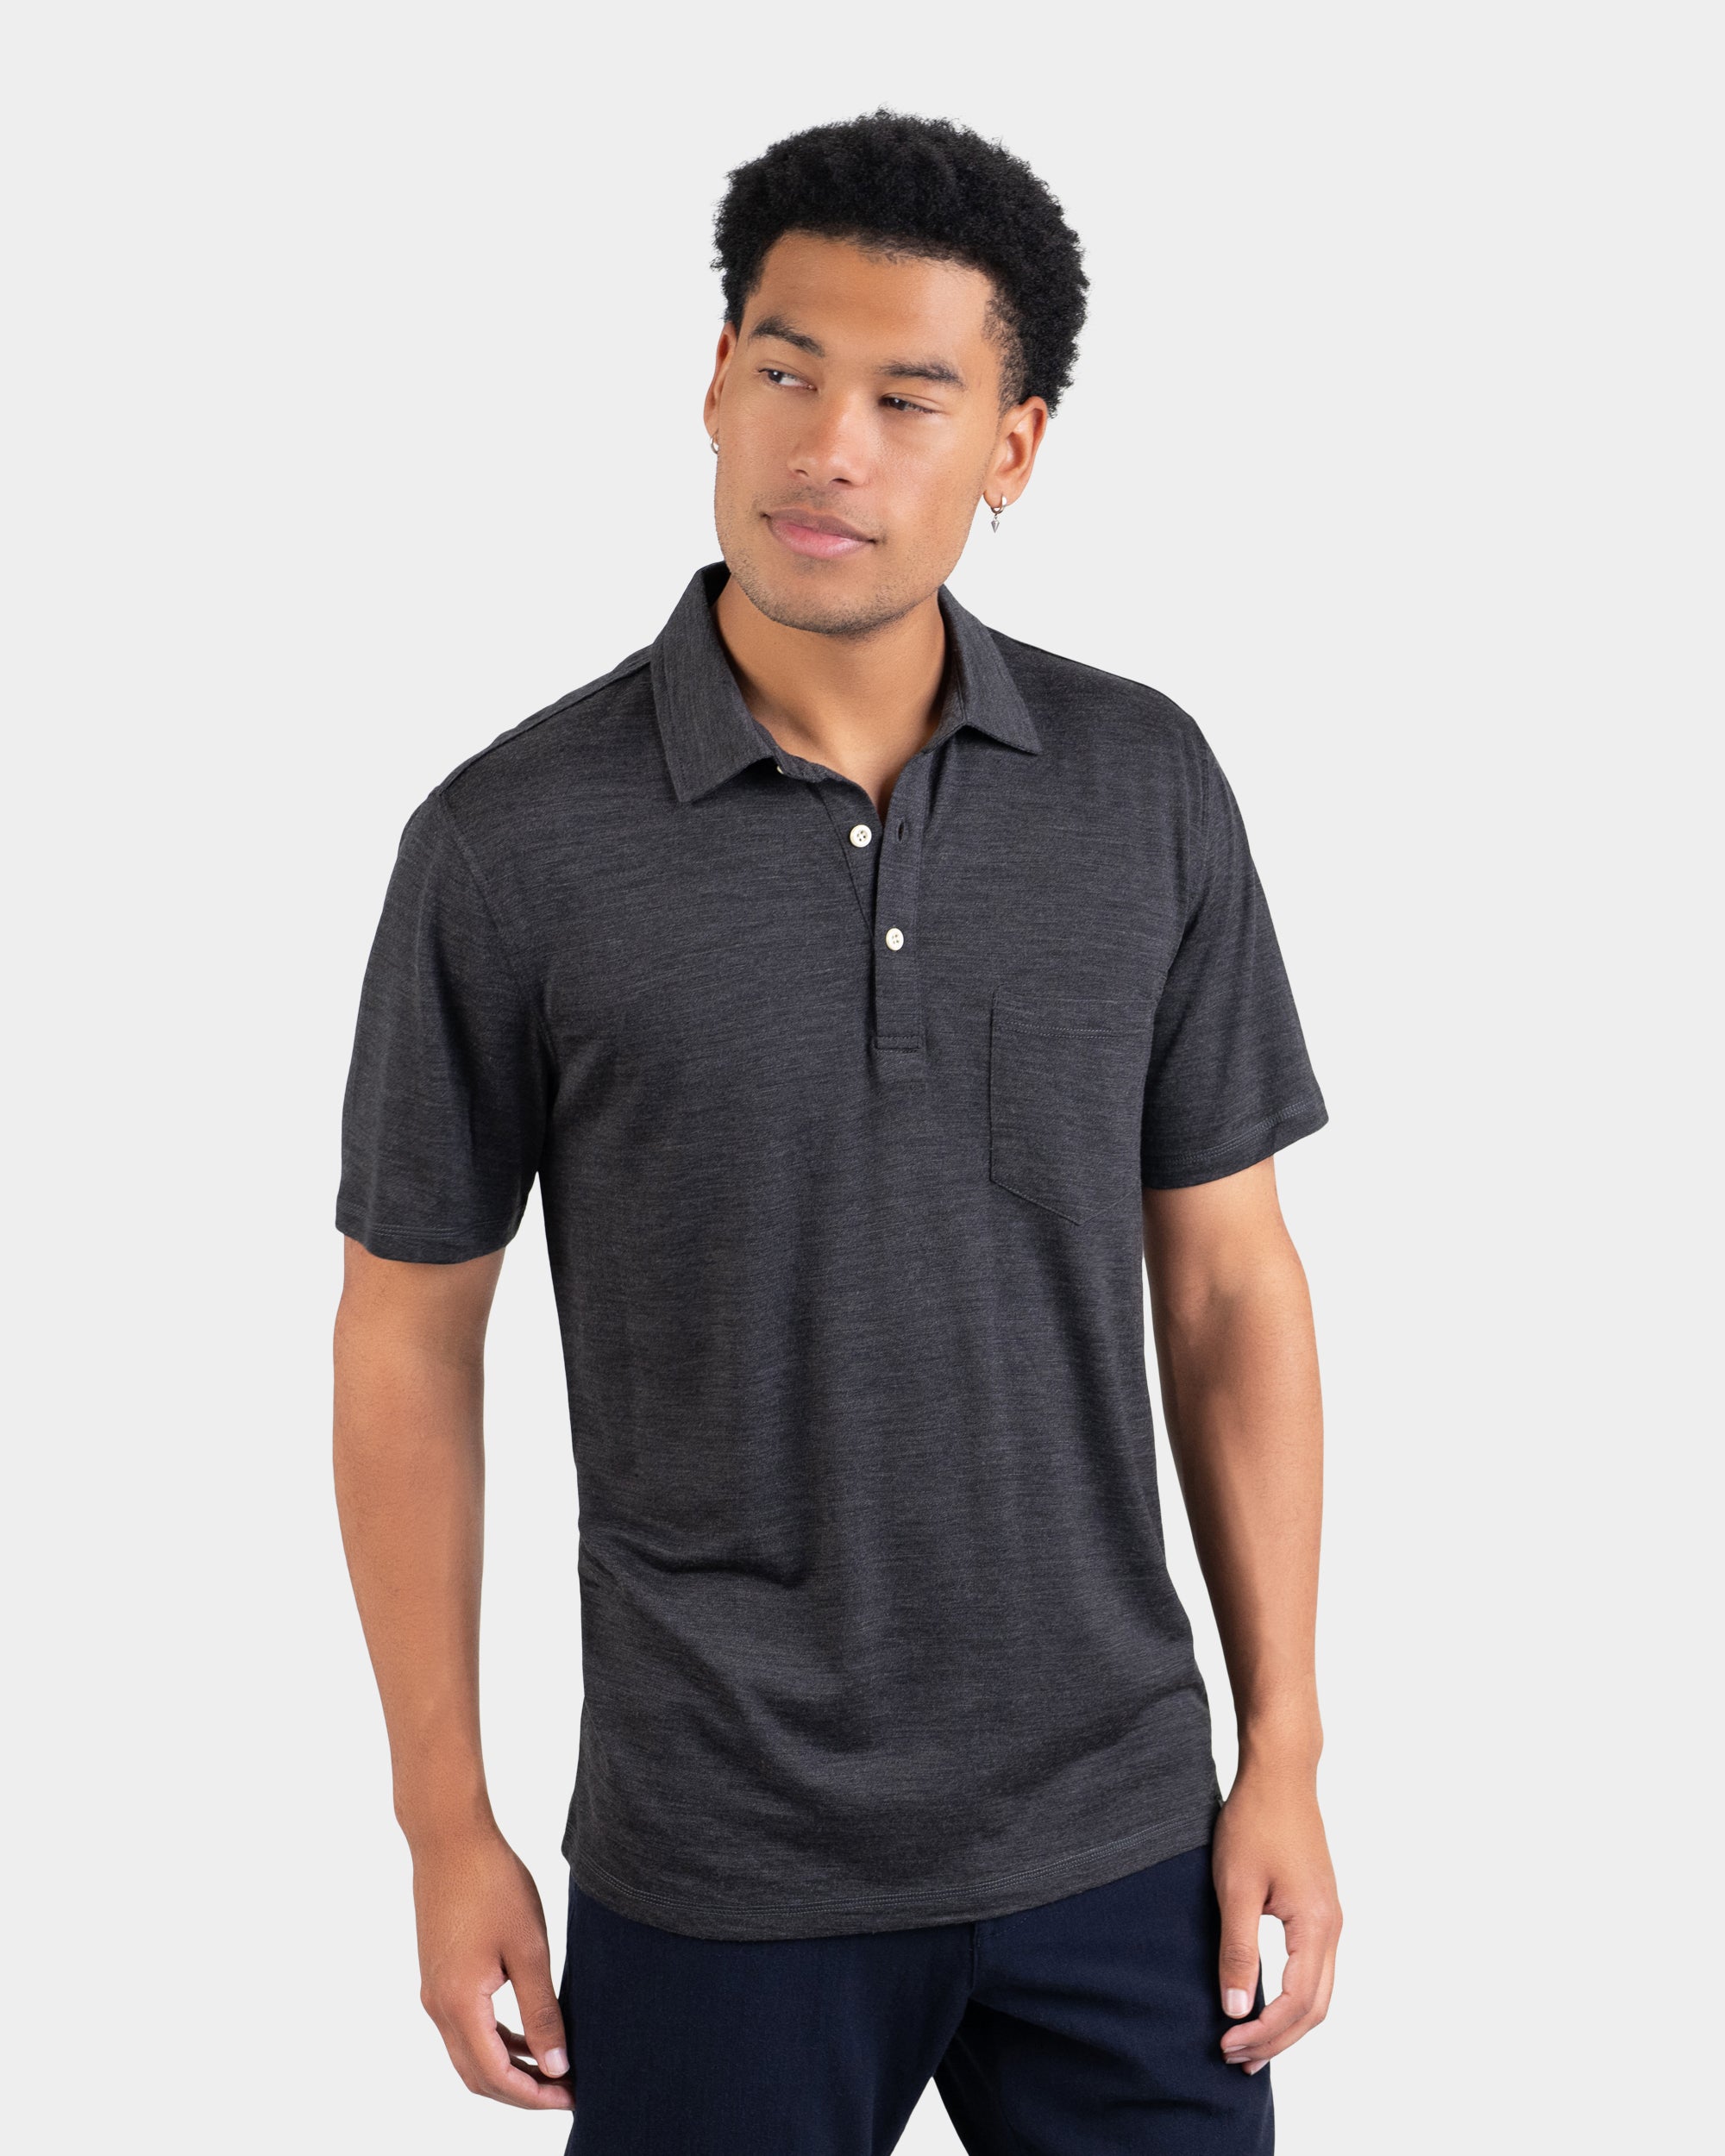 Allen Solly New knit cotton polo size M medium NWT New, zip